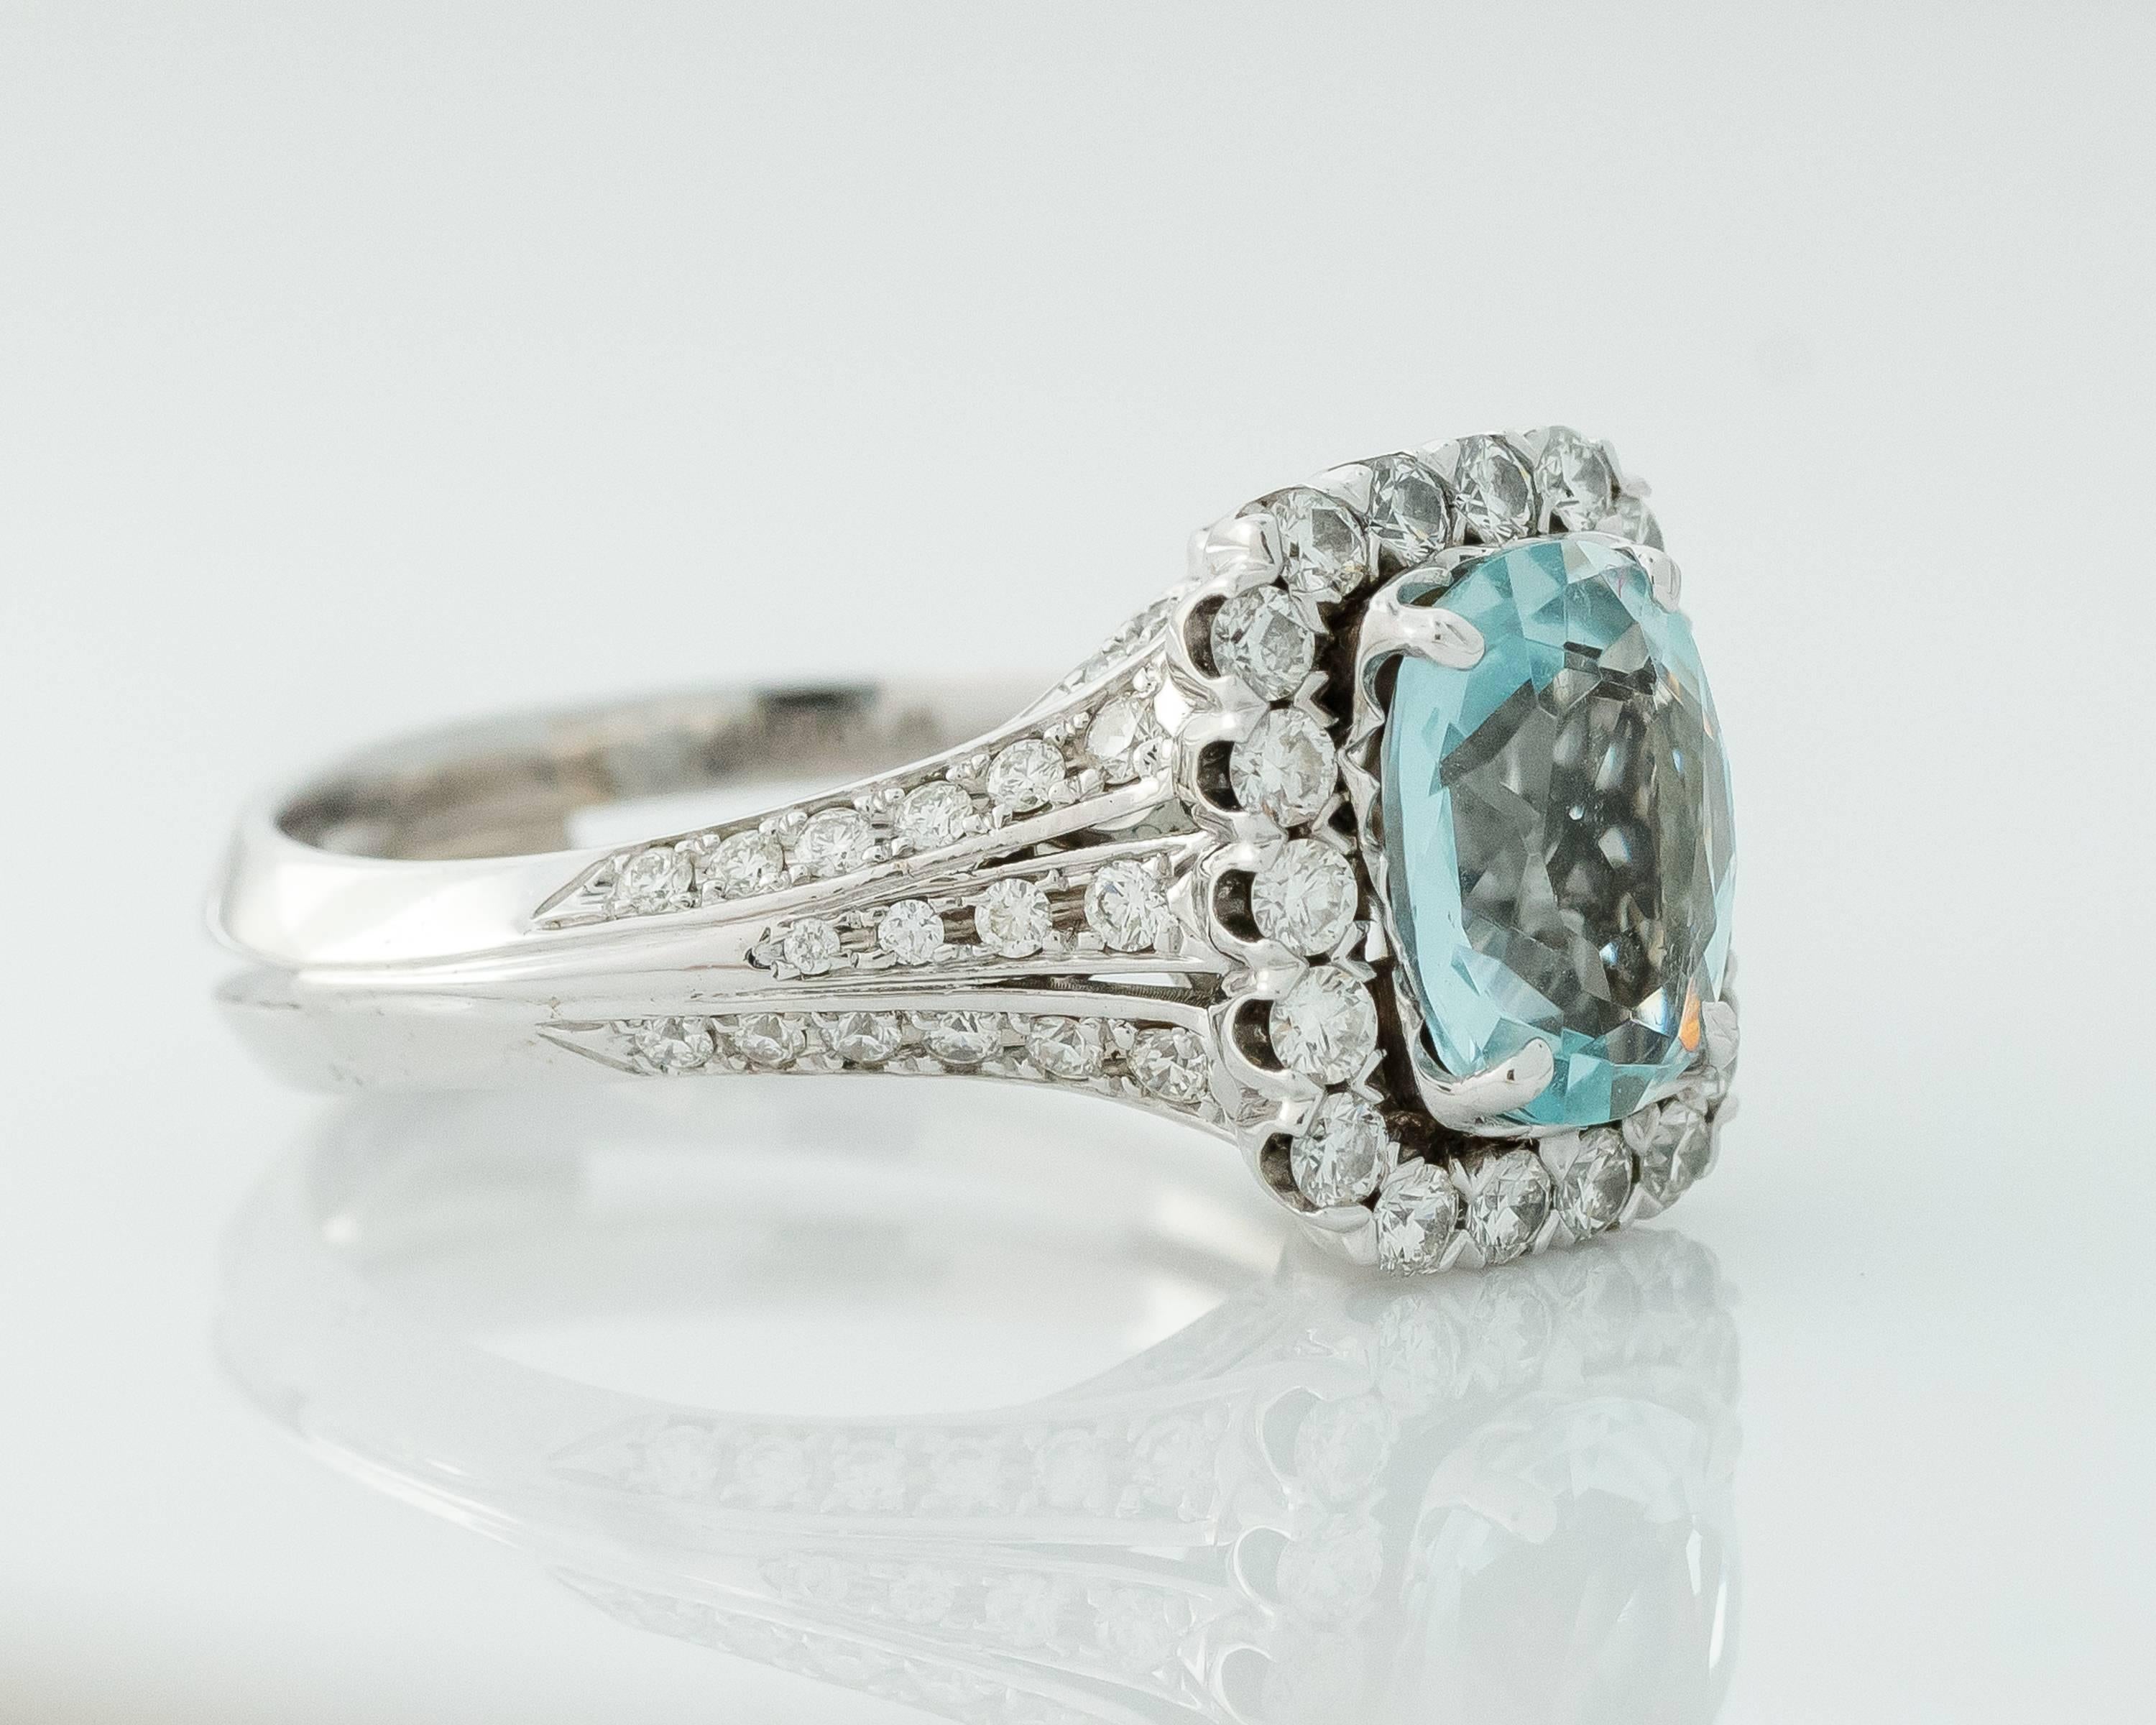  This gorgeous 1990s ring showcases a clear blue 3 Carat Aquamarine center stone surrounded by a beautiful Diamond Halo set in 14 Karat White Gold.

 The high cathedral mounting has a sweet diamond bow design on each of the 2 profile views. The